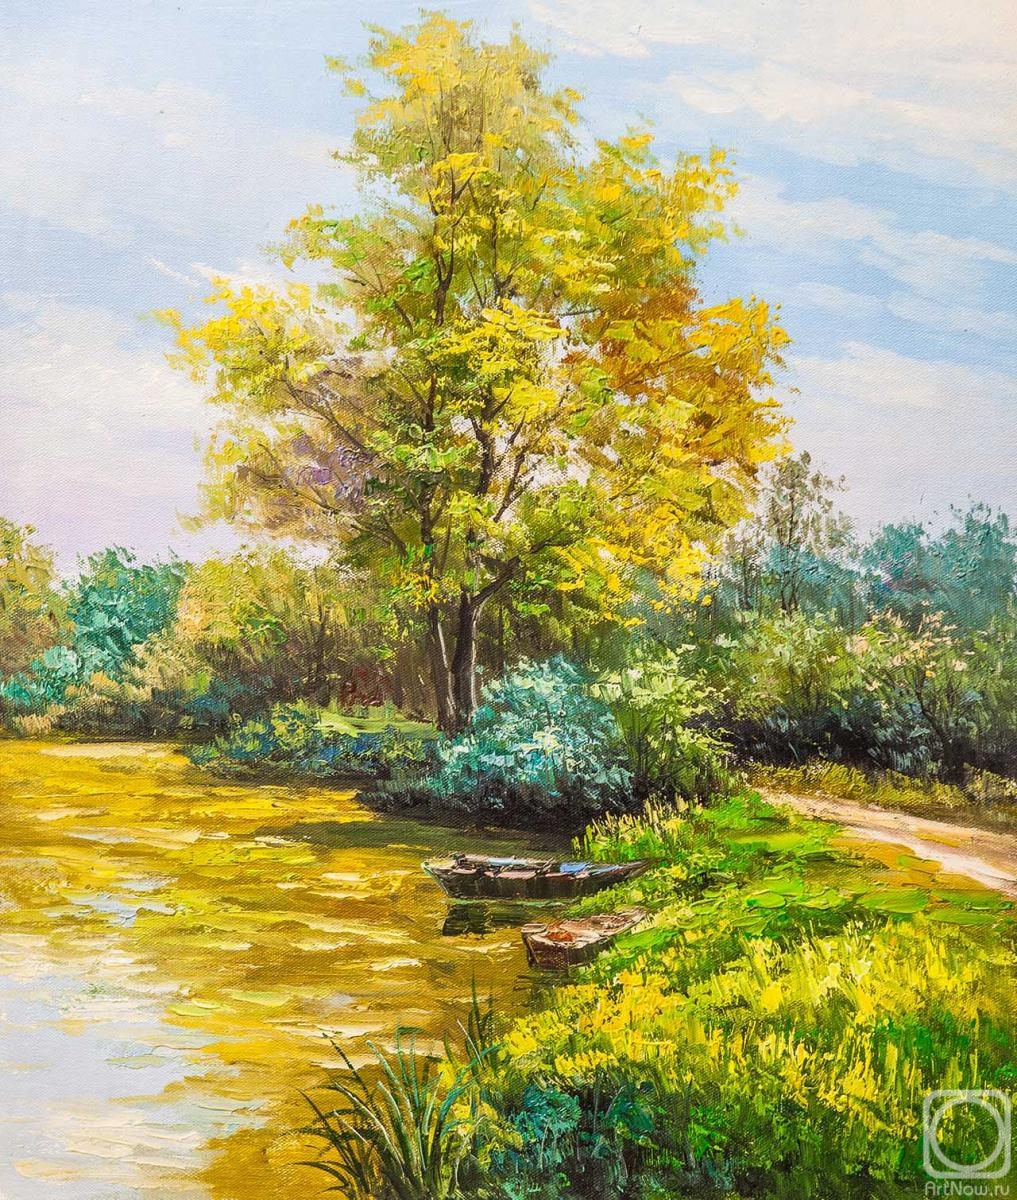 Sharabarin Andrey. On a Clear Day by the River